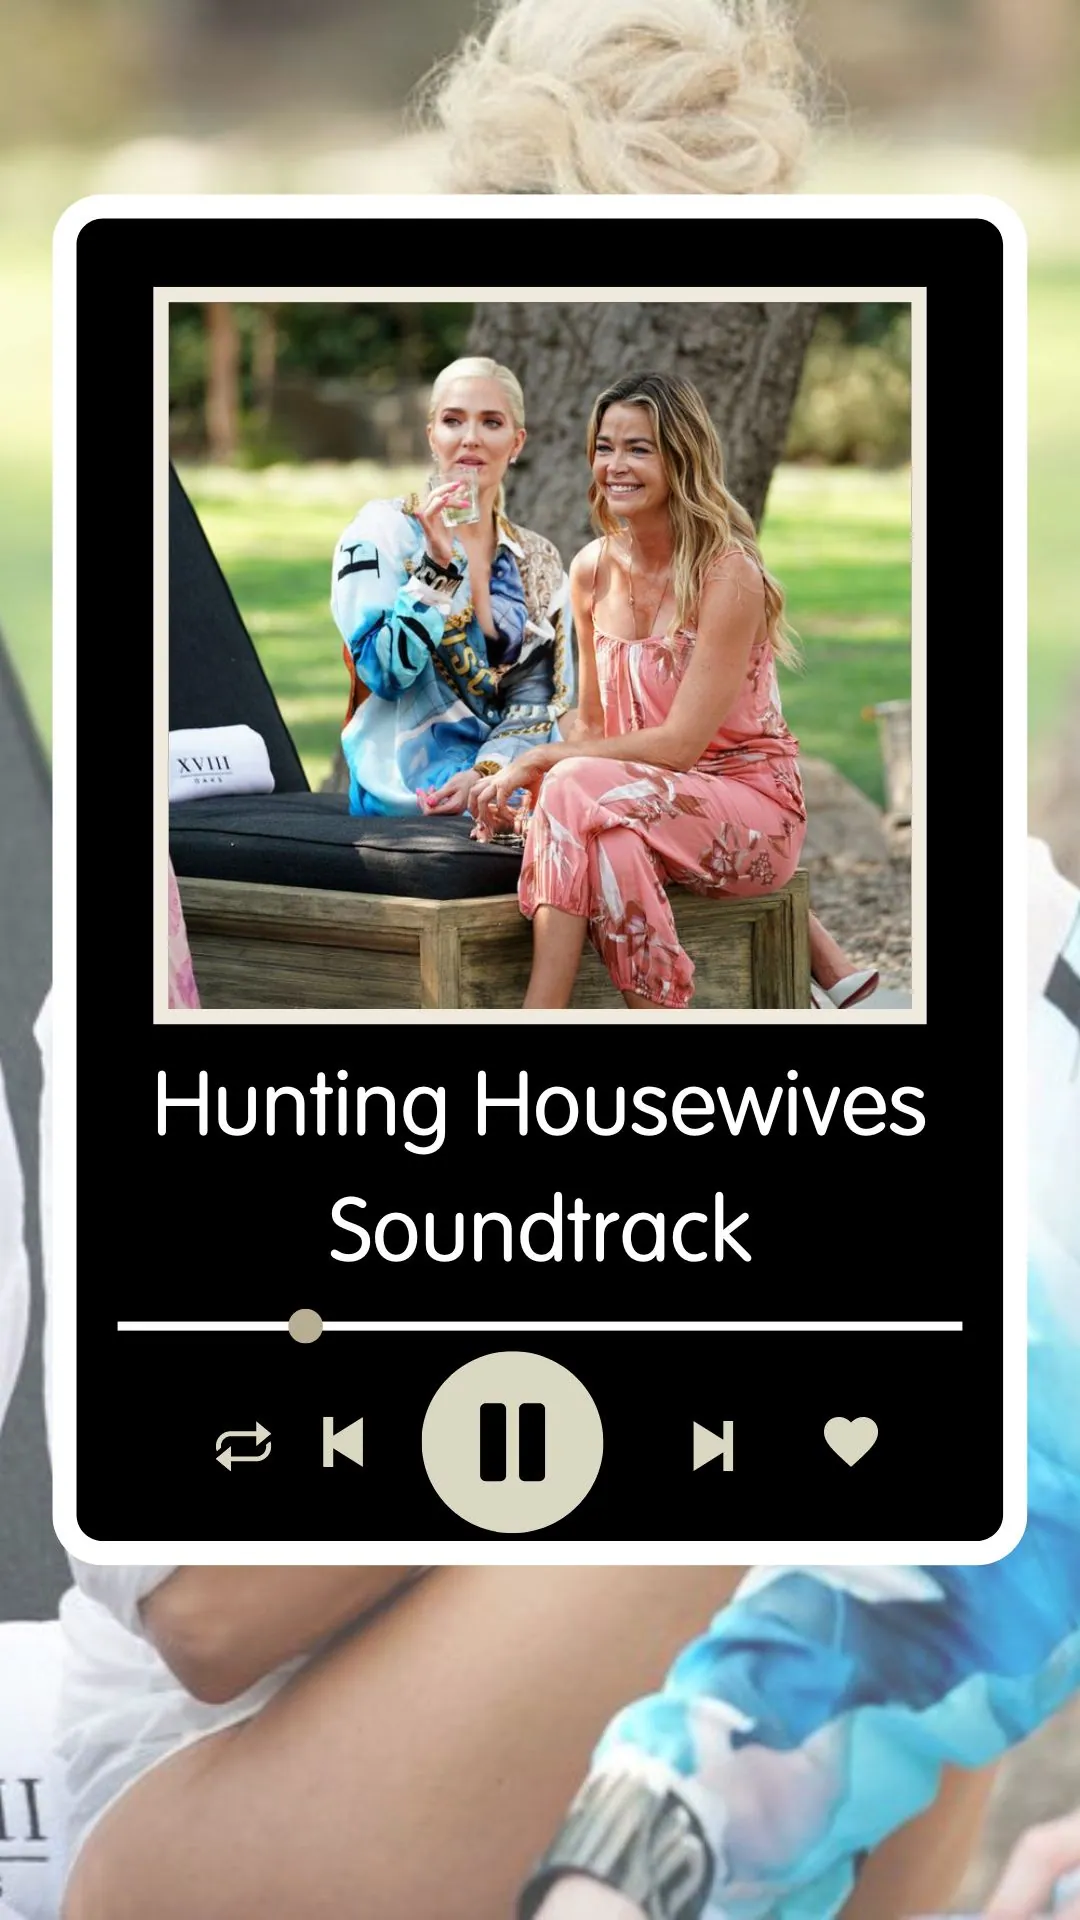 Hunting Housewives Soundtrack